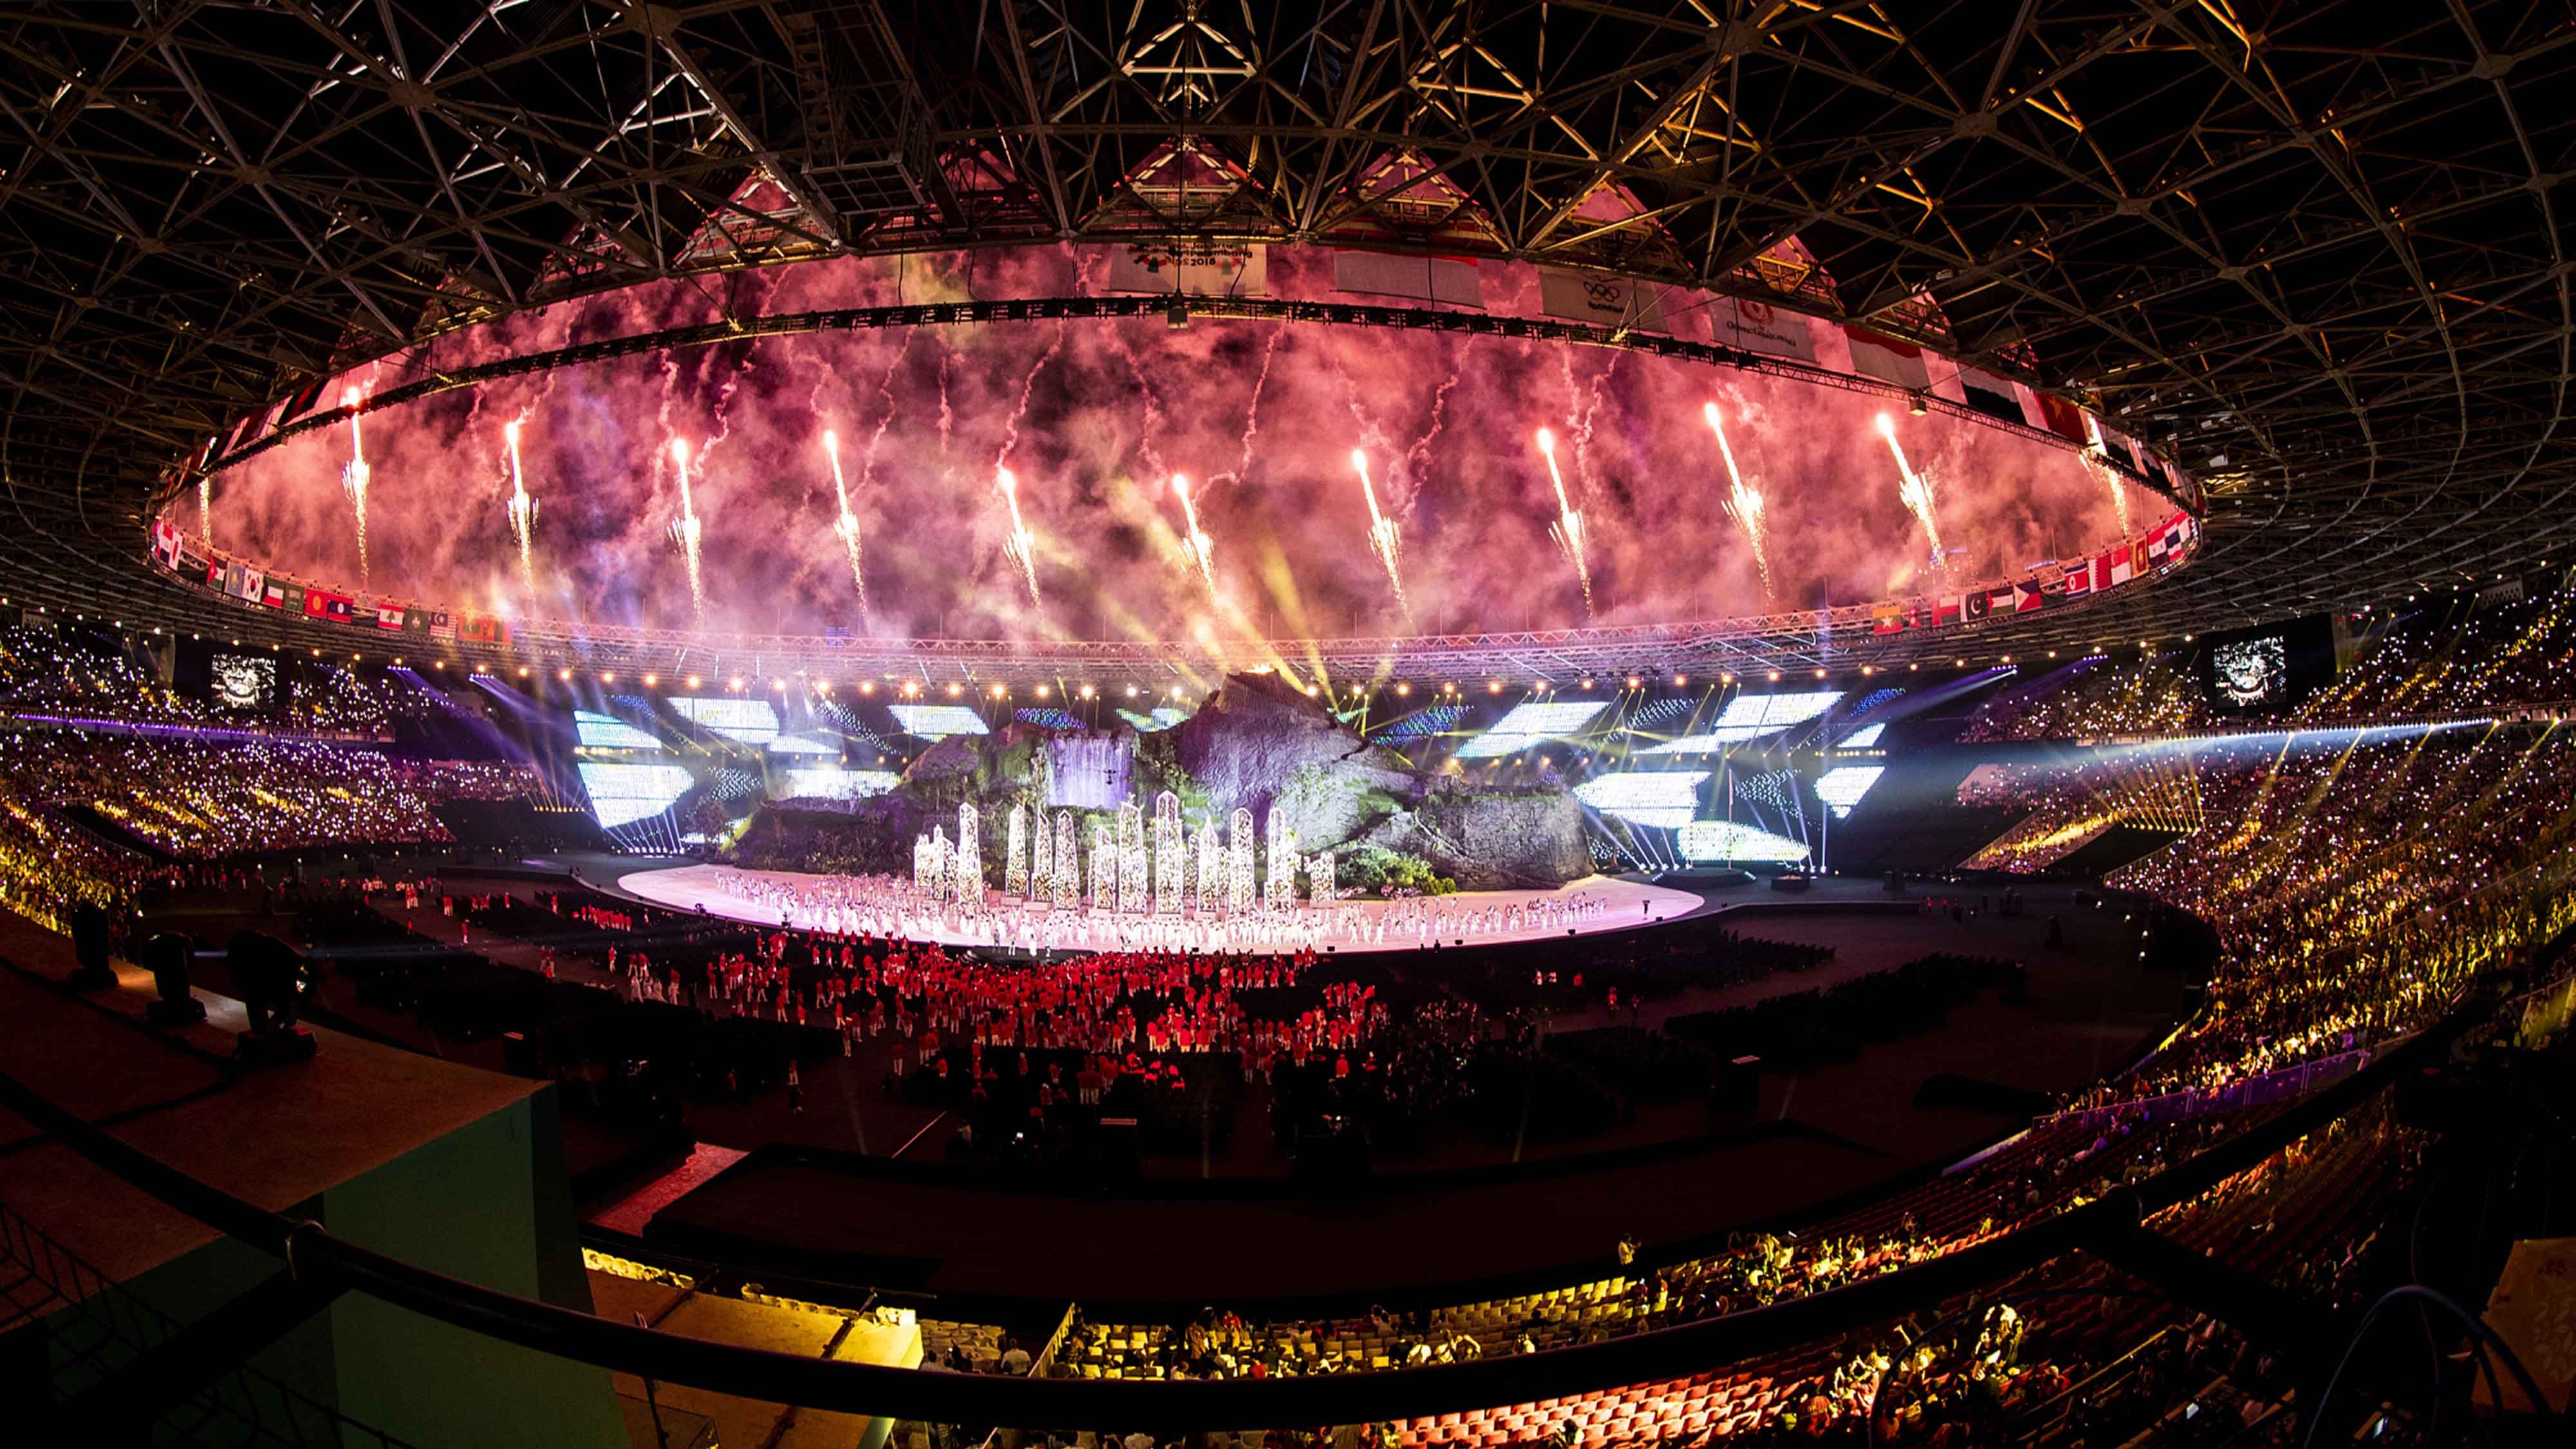 The opening ceremony of the 18th Asian Games was held on Saturday night